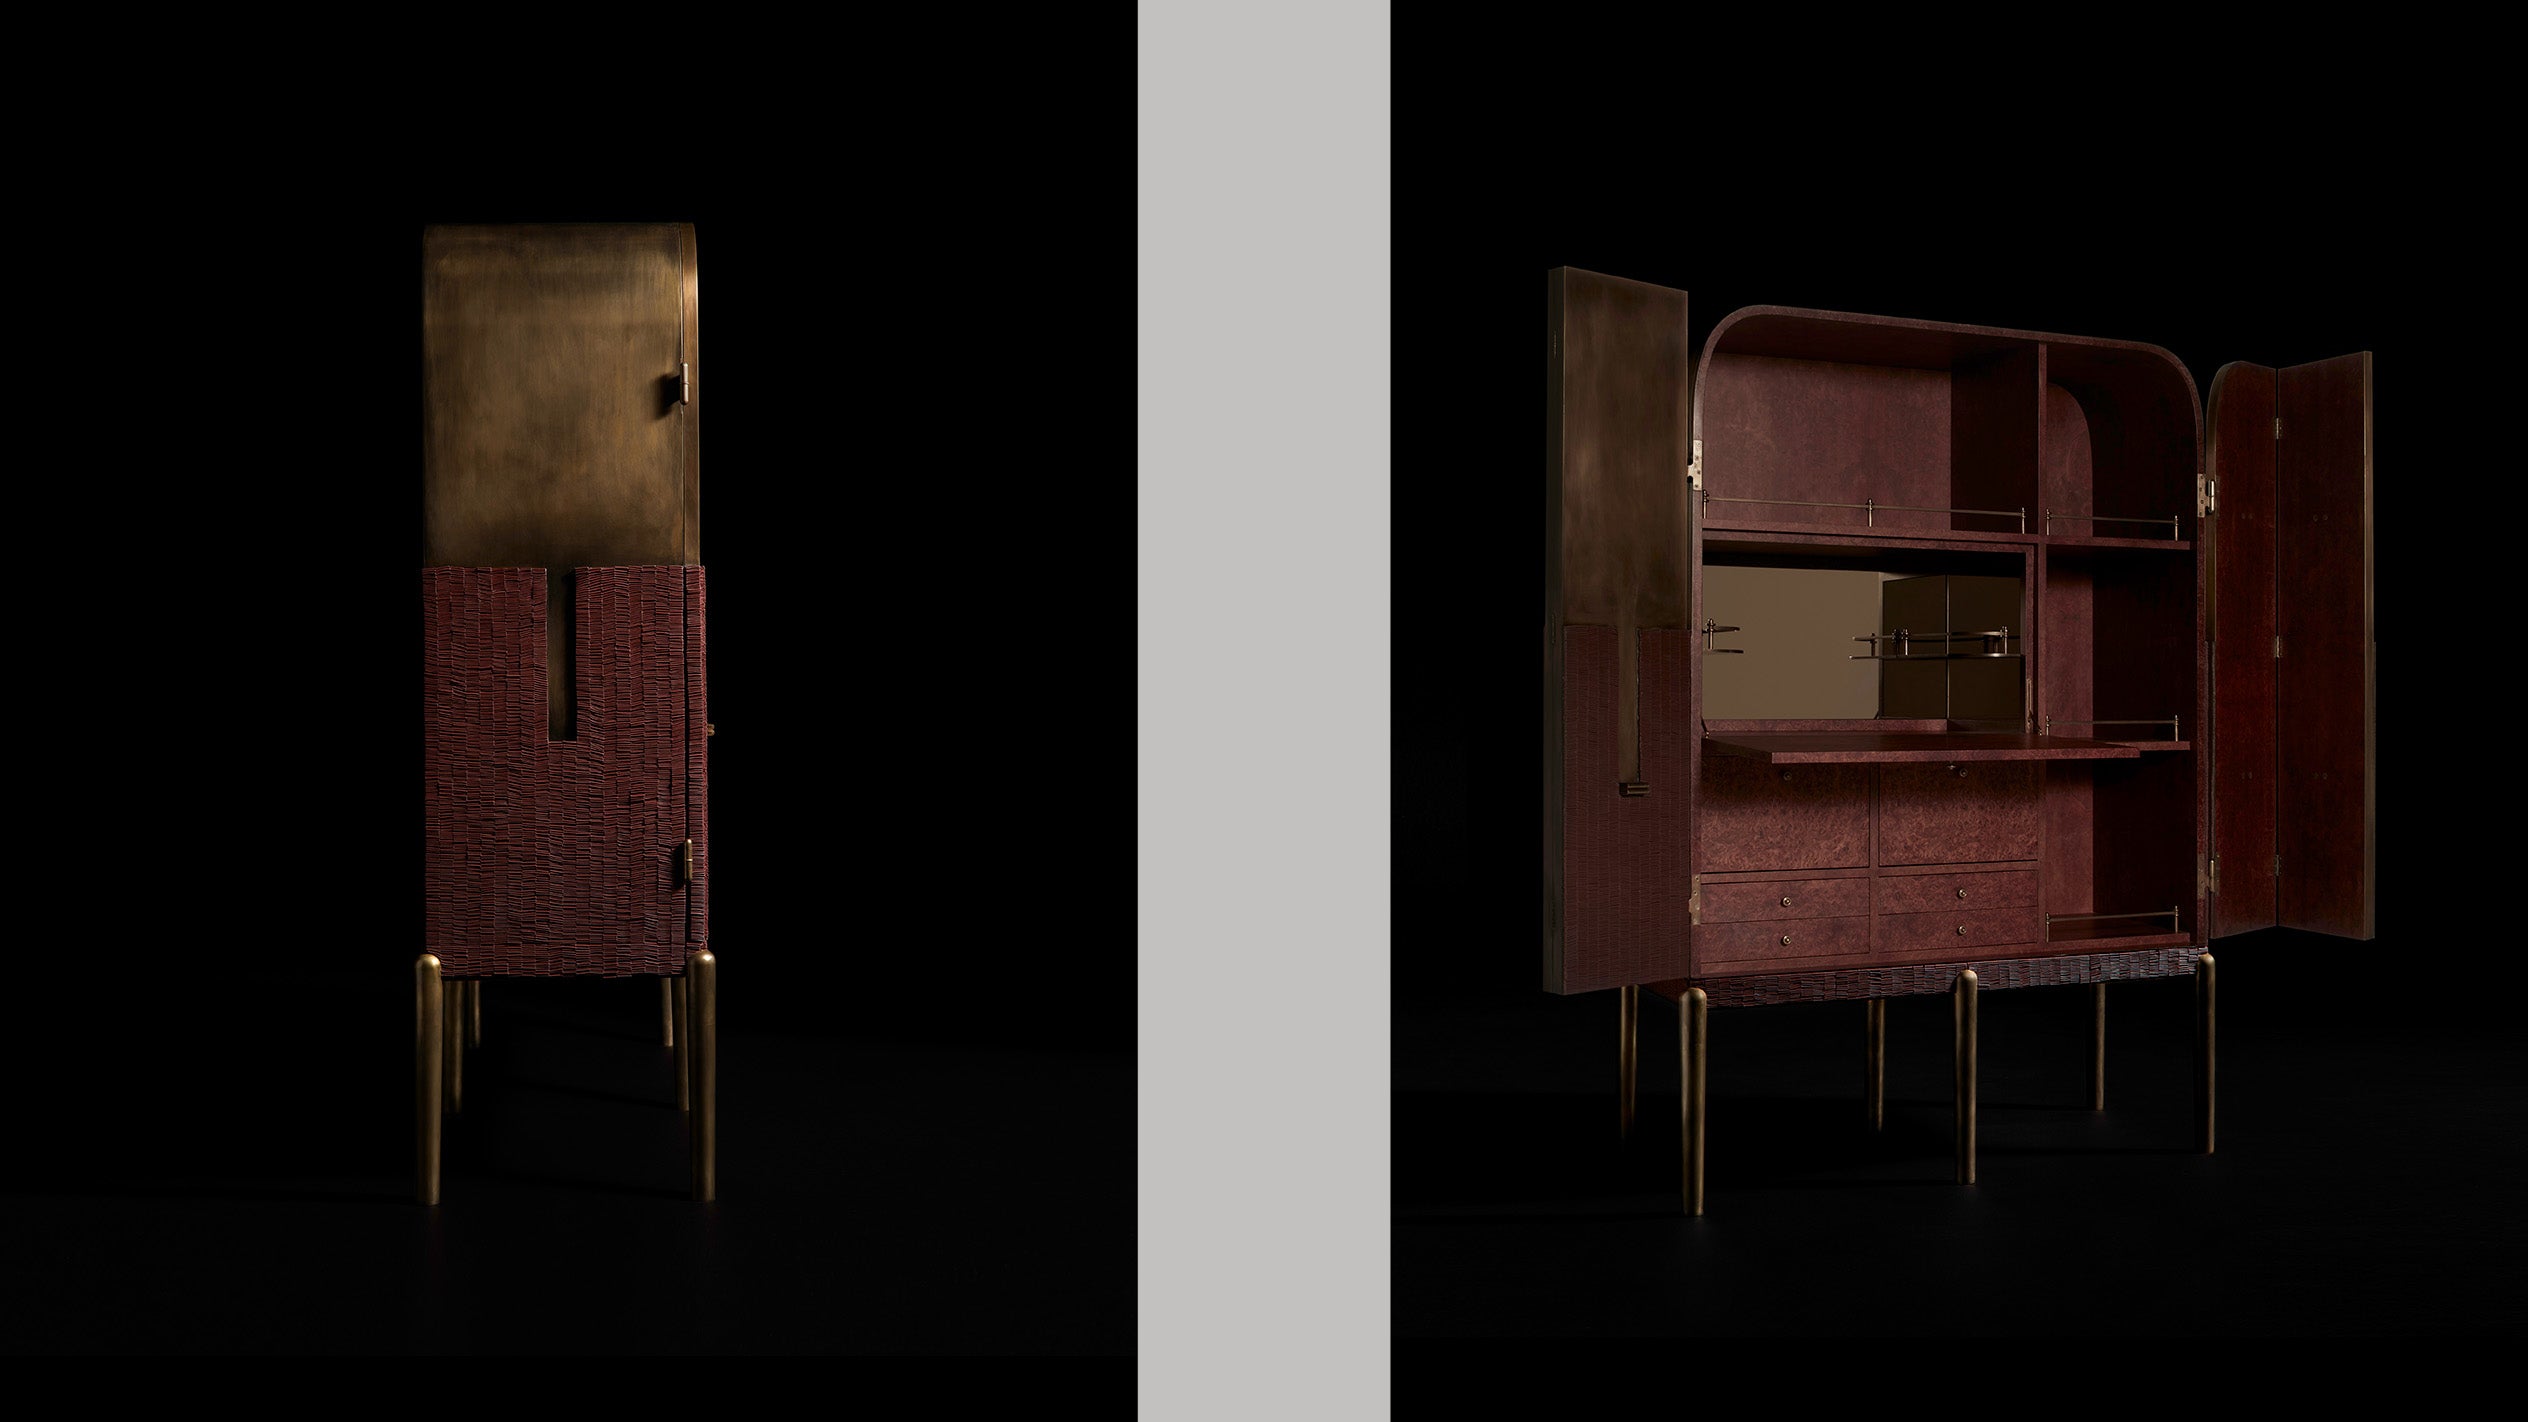 INTERLUDE cabinet from the side view, alongside another image of INTERLUDE cabinet with one of its doors open.